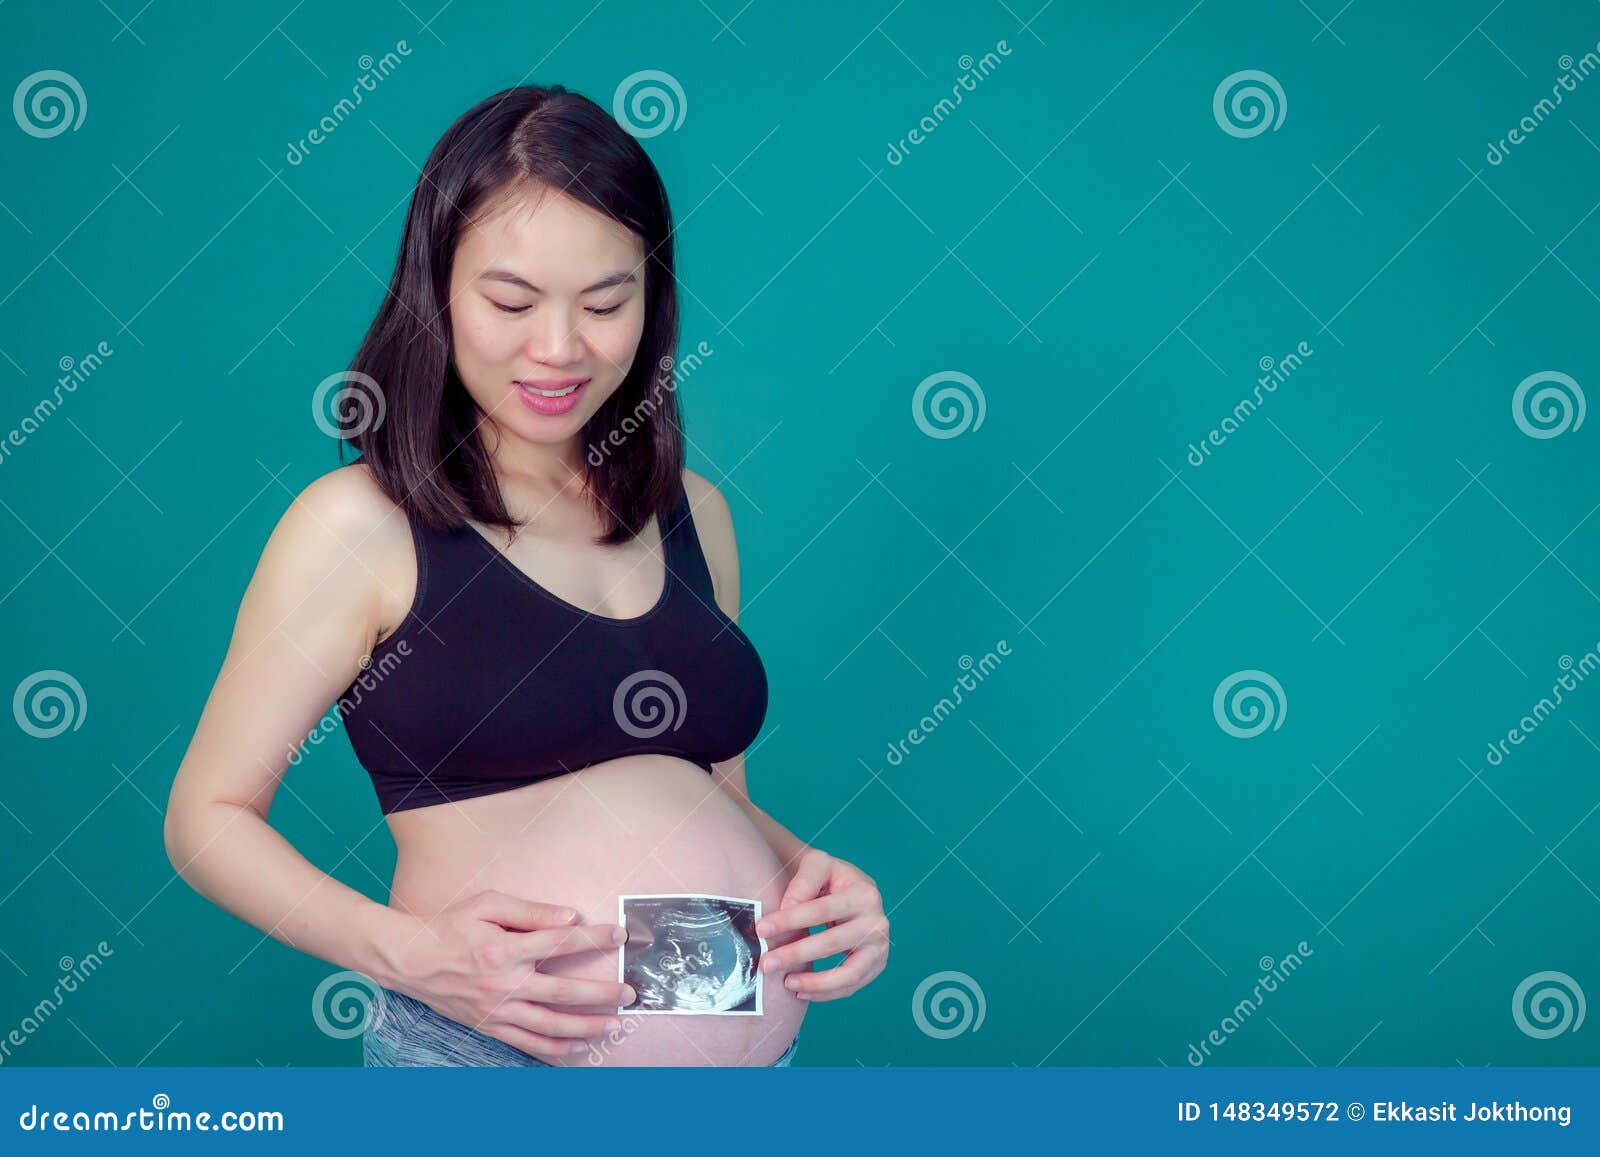 A Beautiful Asian Lady Mother Is Pregnant Take An Ultrasound Image Put